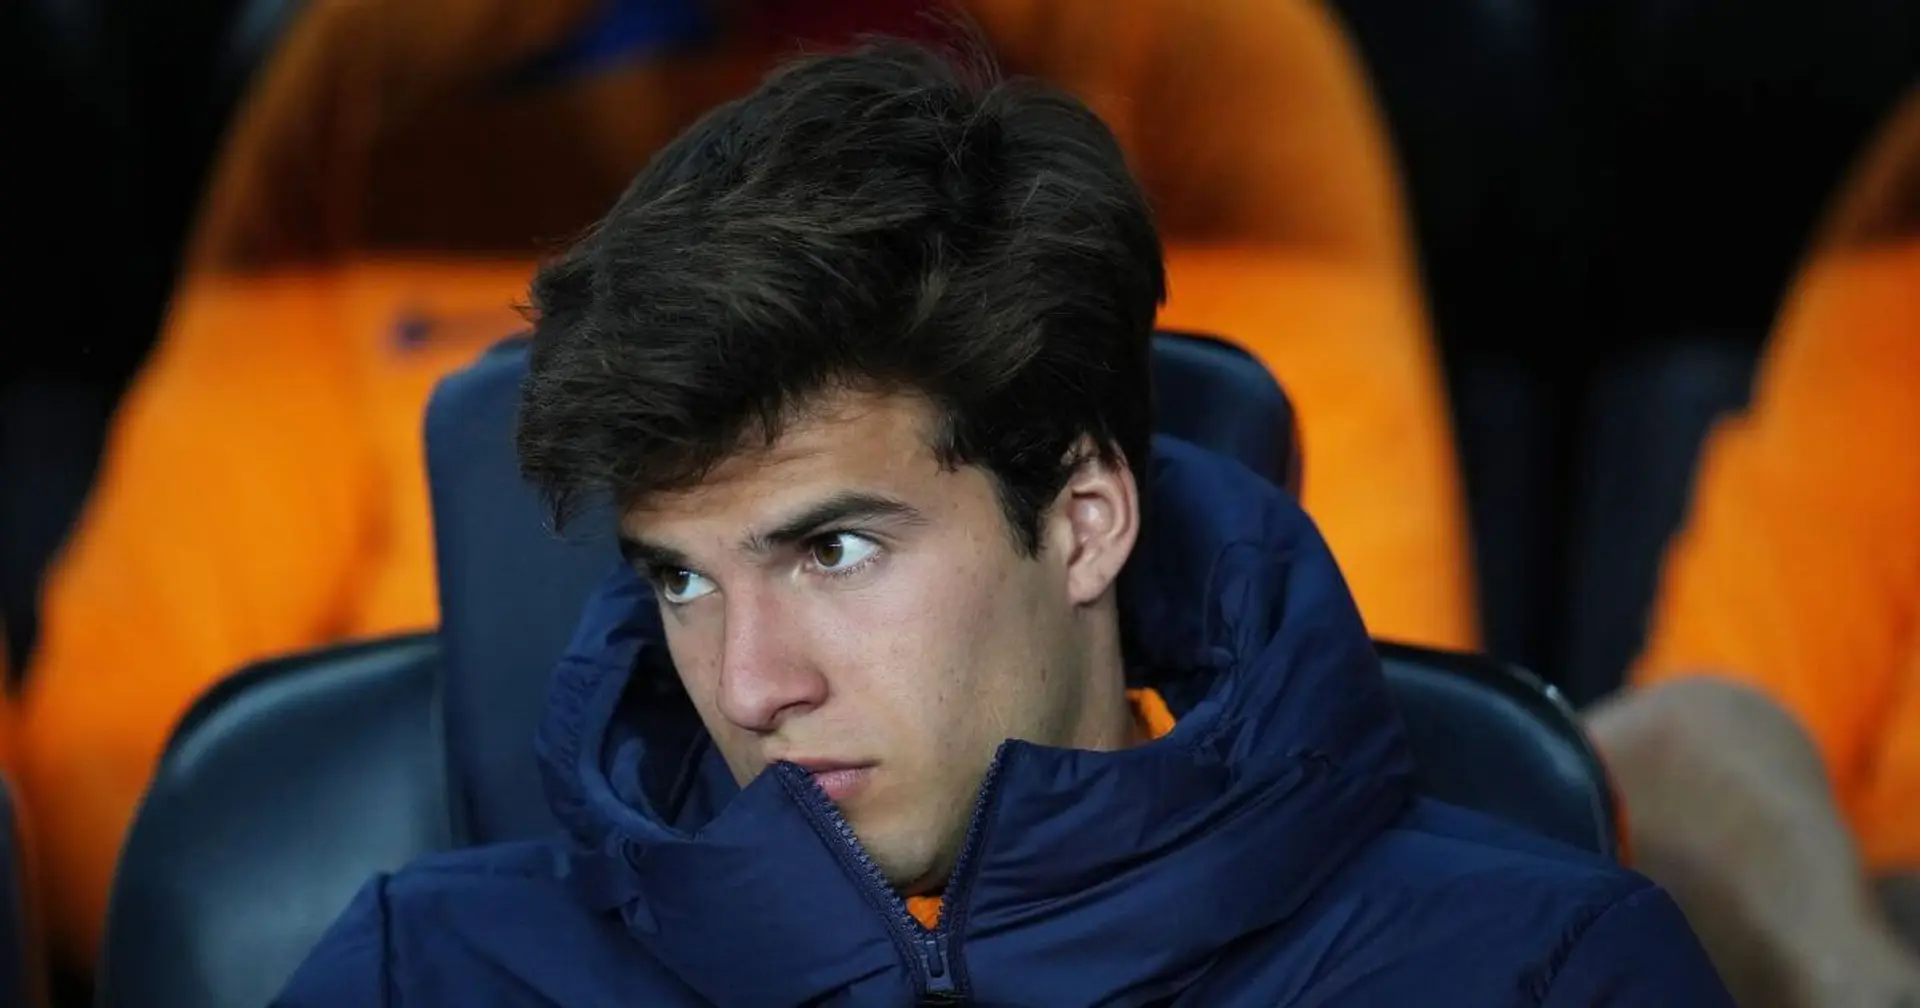 Riqui Puig reaches 'agreement in principle' with LA Galaxy